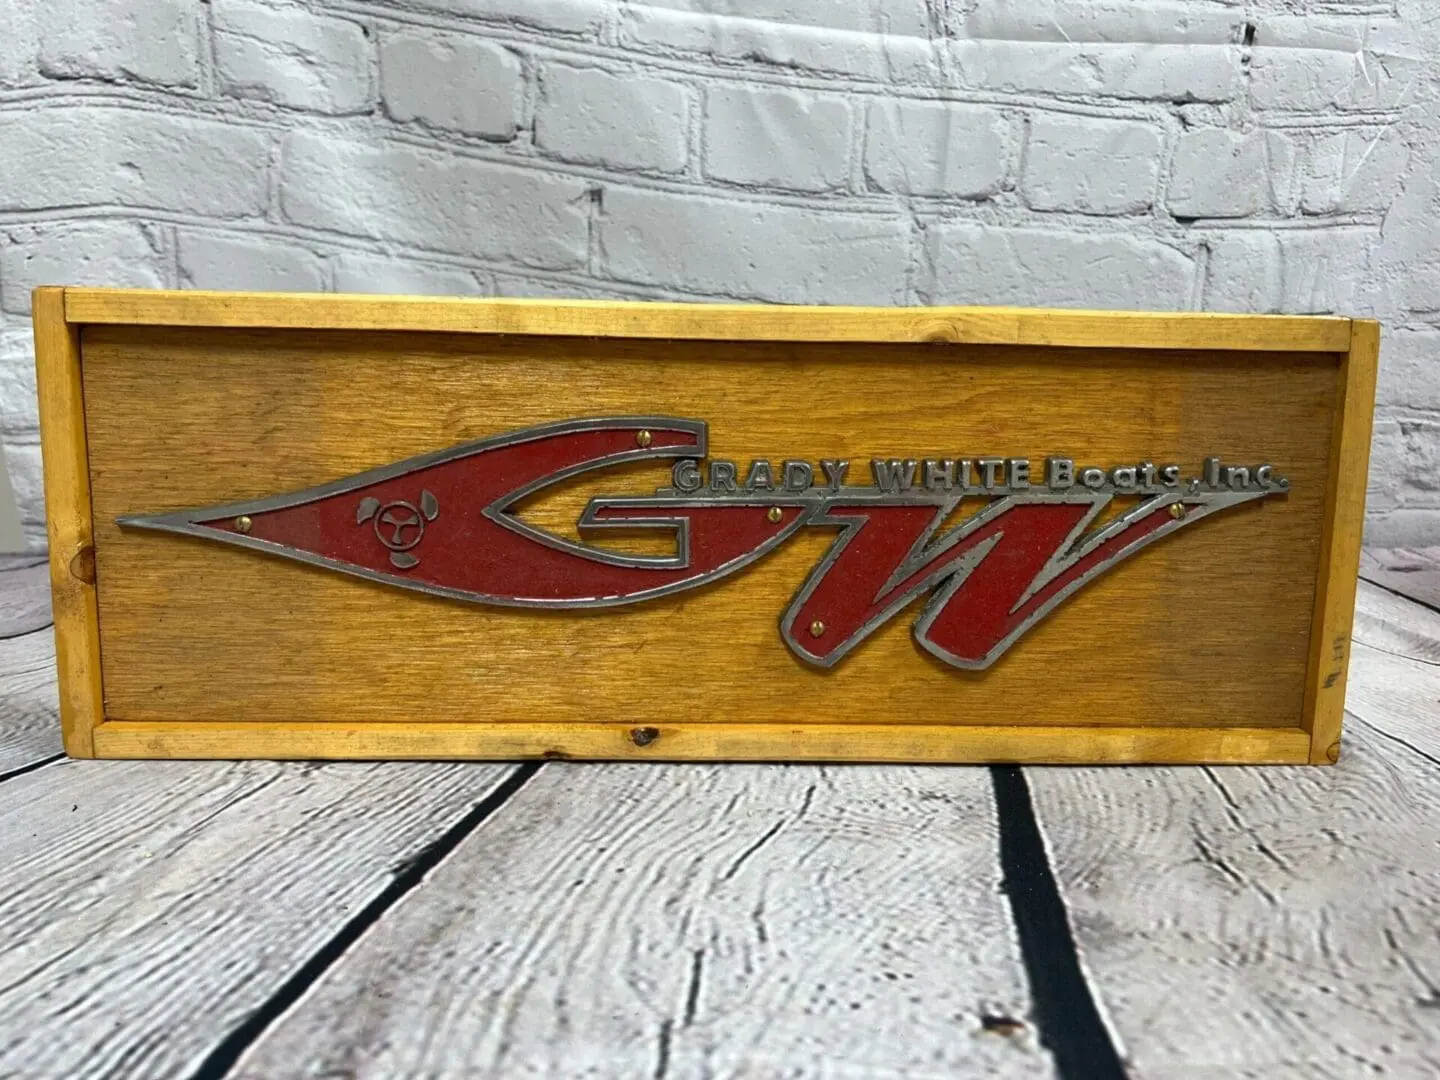 A wooden box with the logo of the company gw.